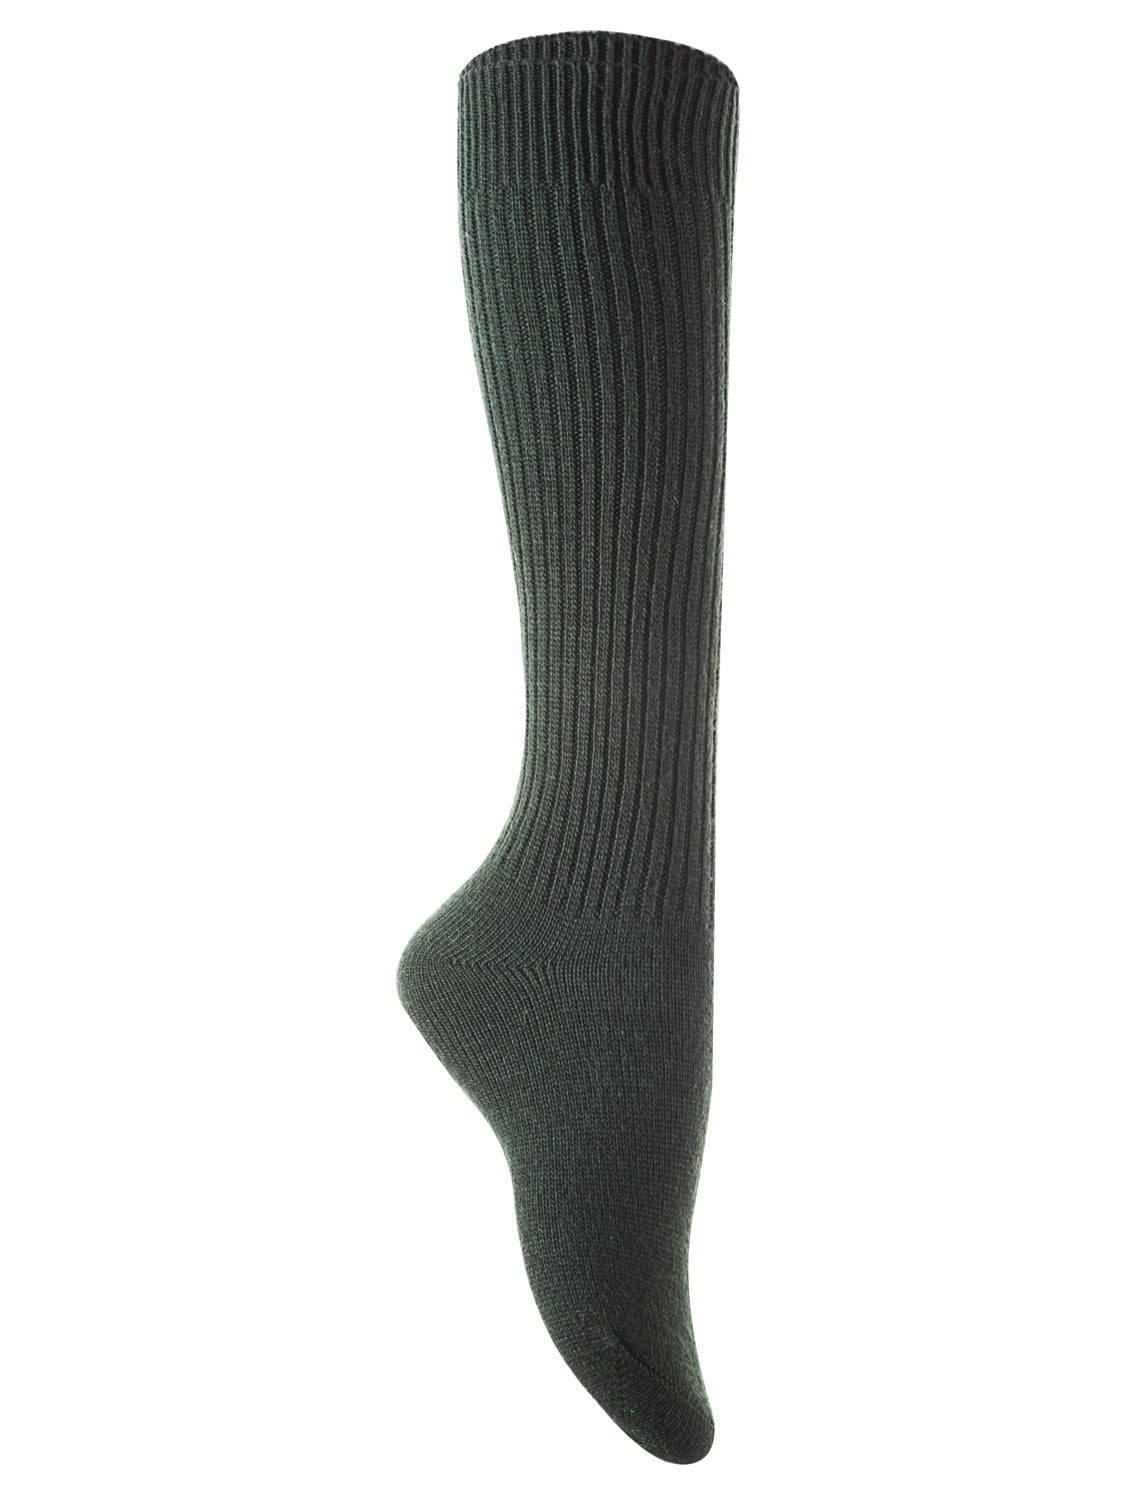 NEW WELLY WARMAS Green/Black Childs Cosy Wellington Liner Socks Ages 3-4